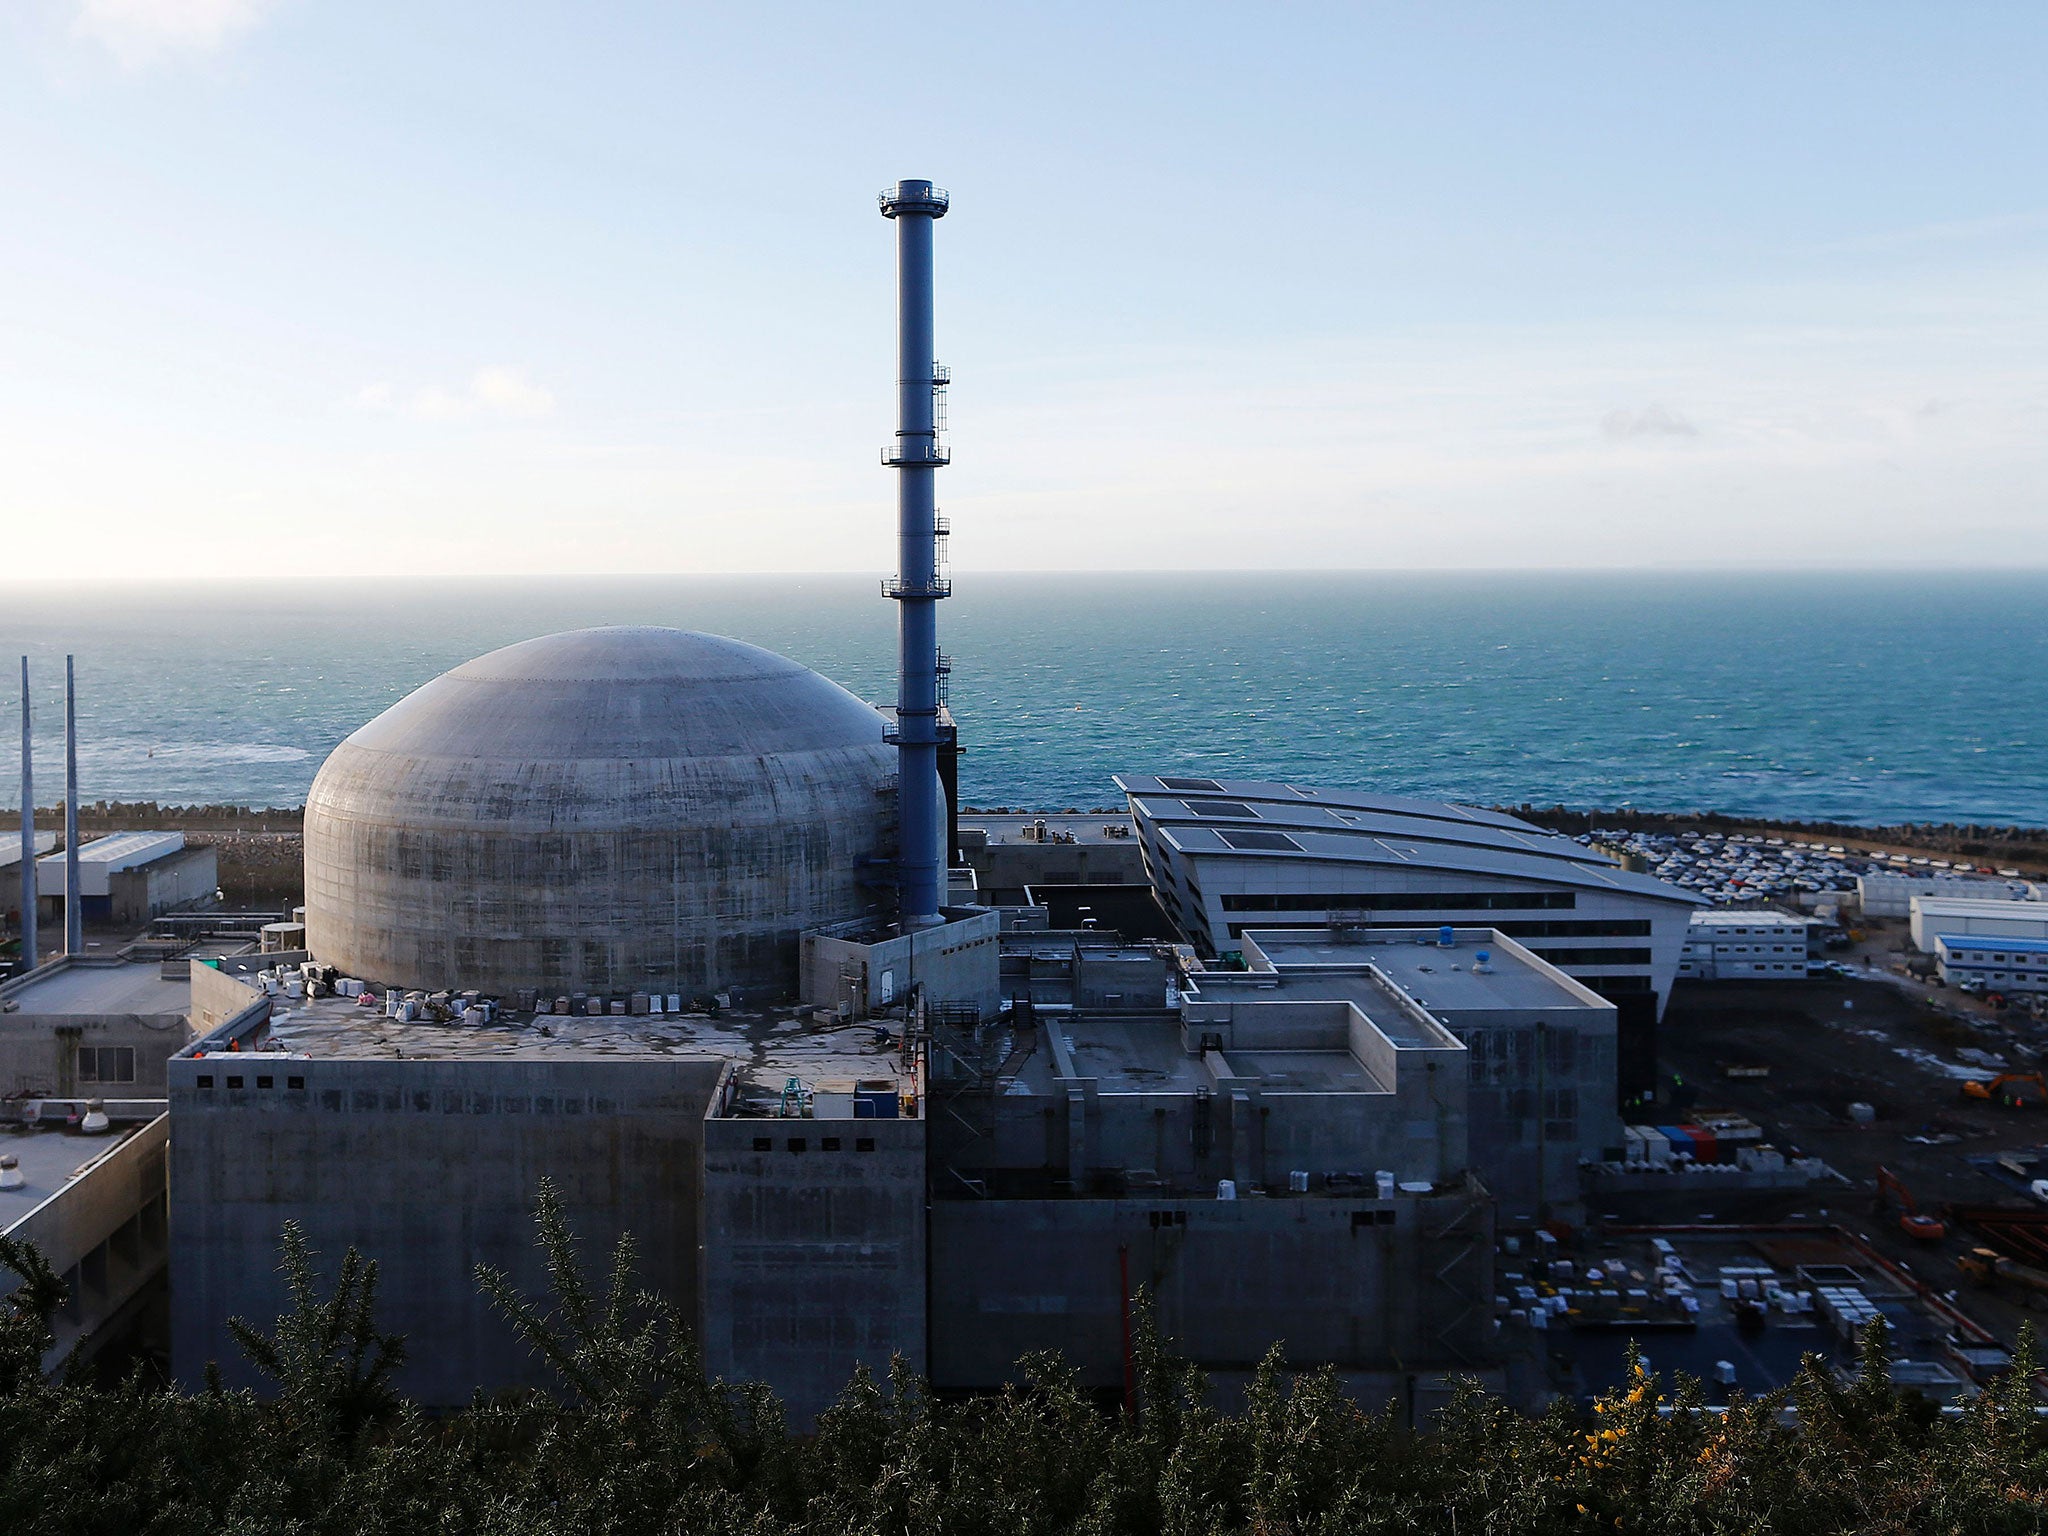 The Flamanville nuclear power plant in northern France in November 2016